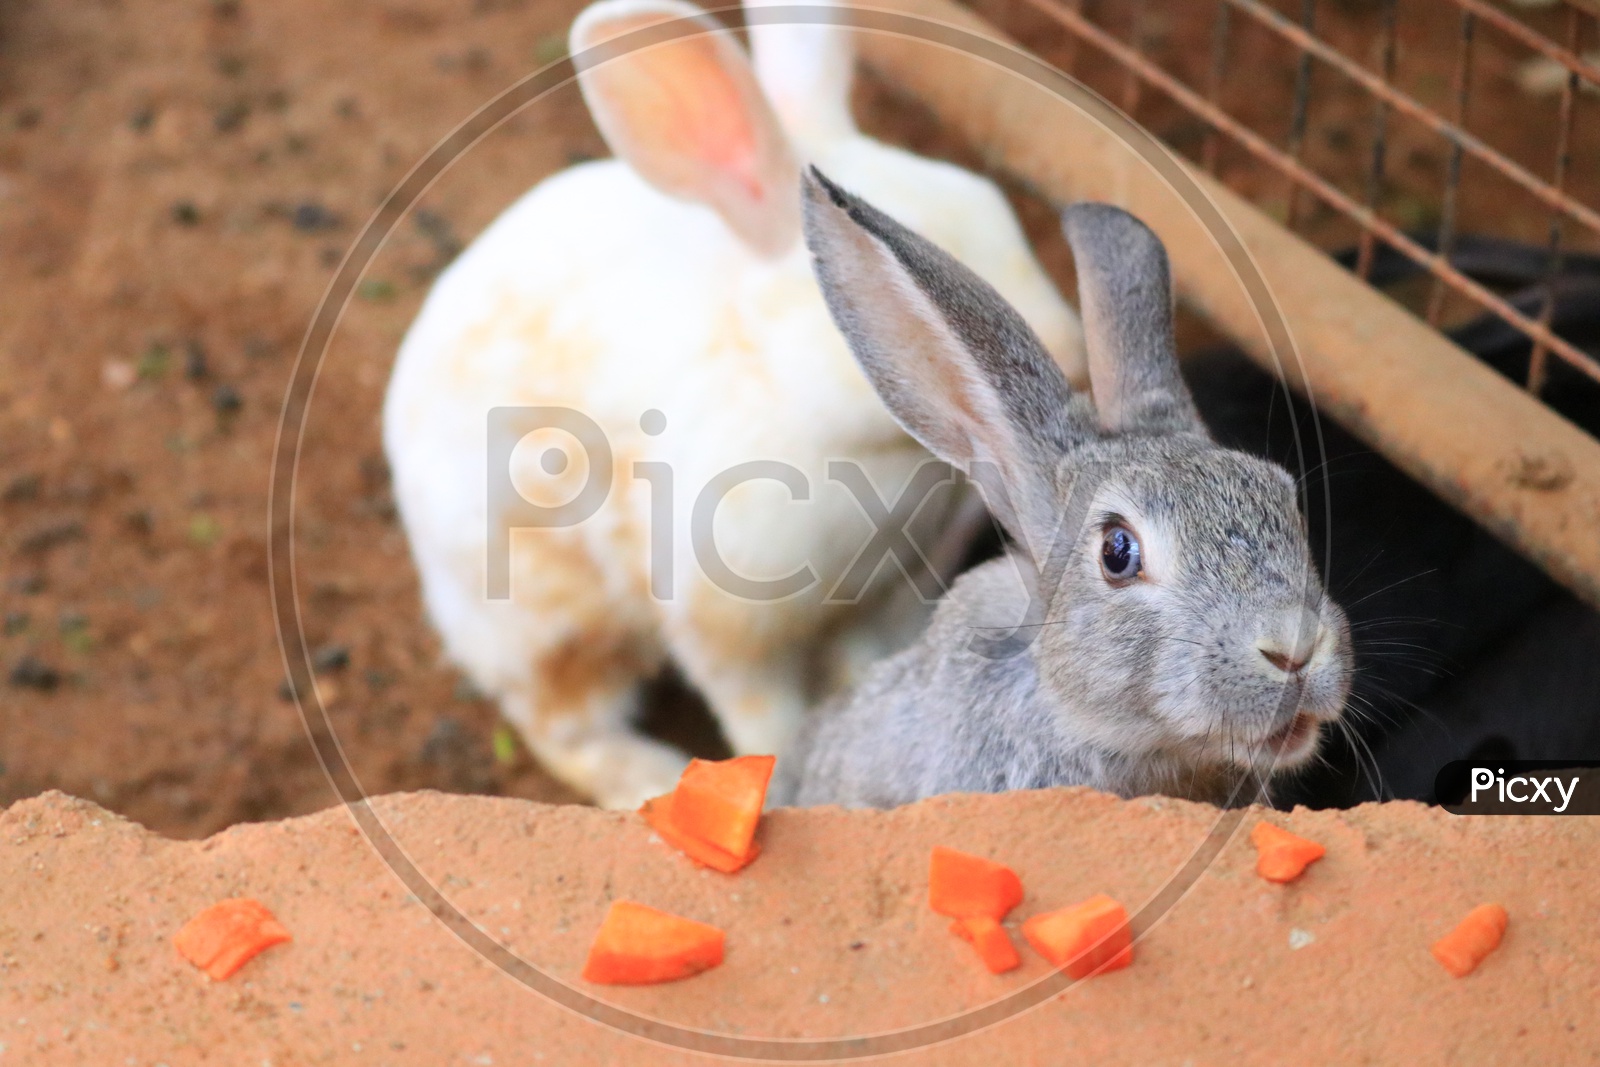 A grey rabbit fed with pieces of carrot